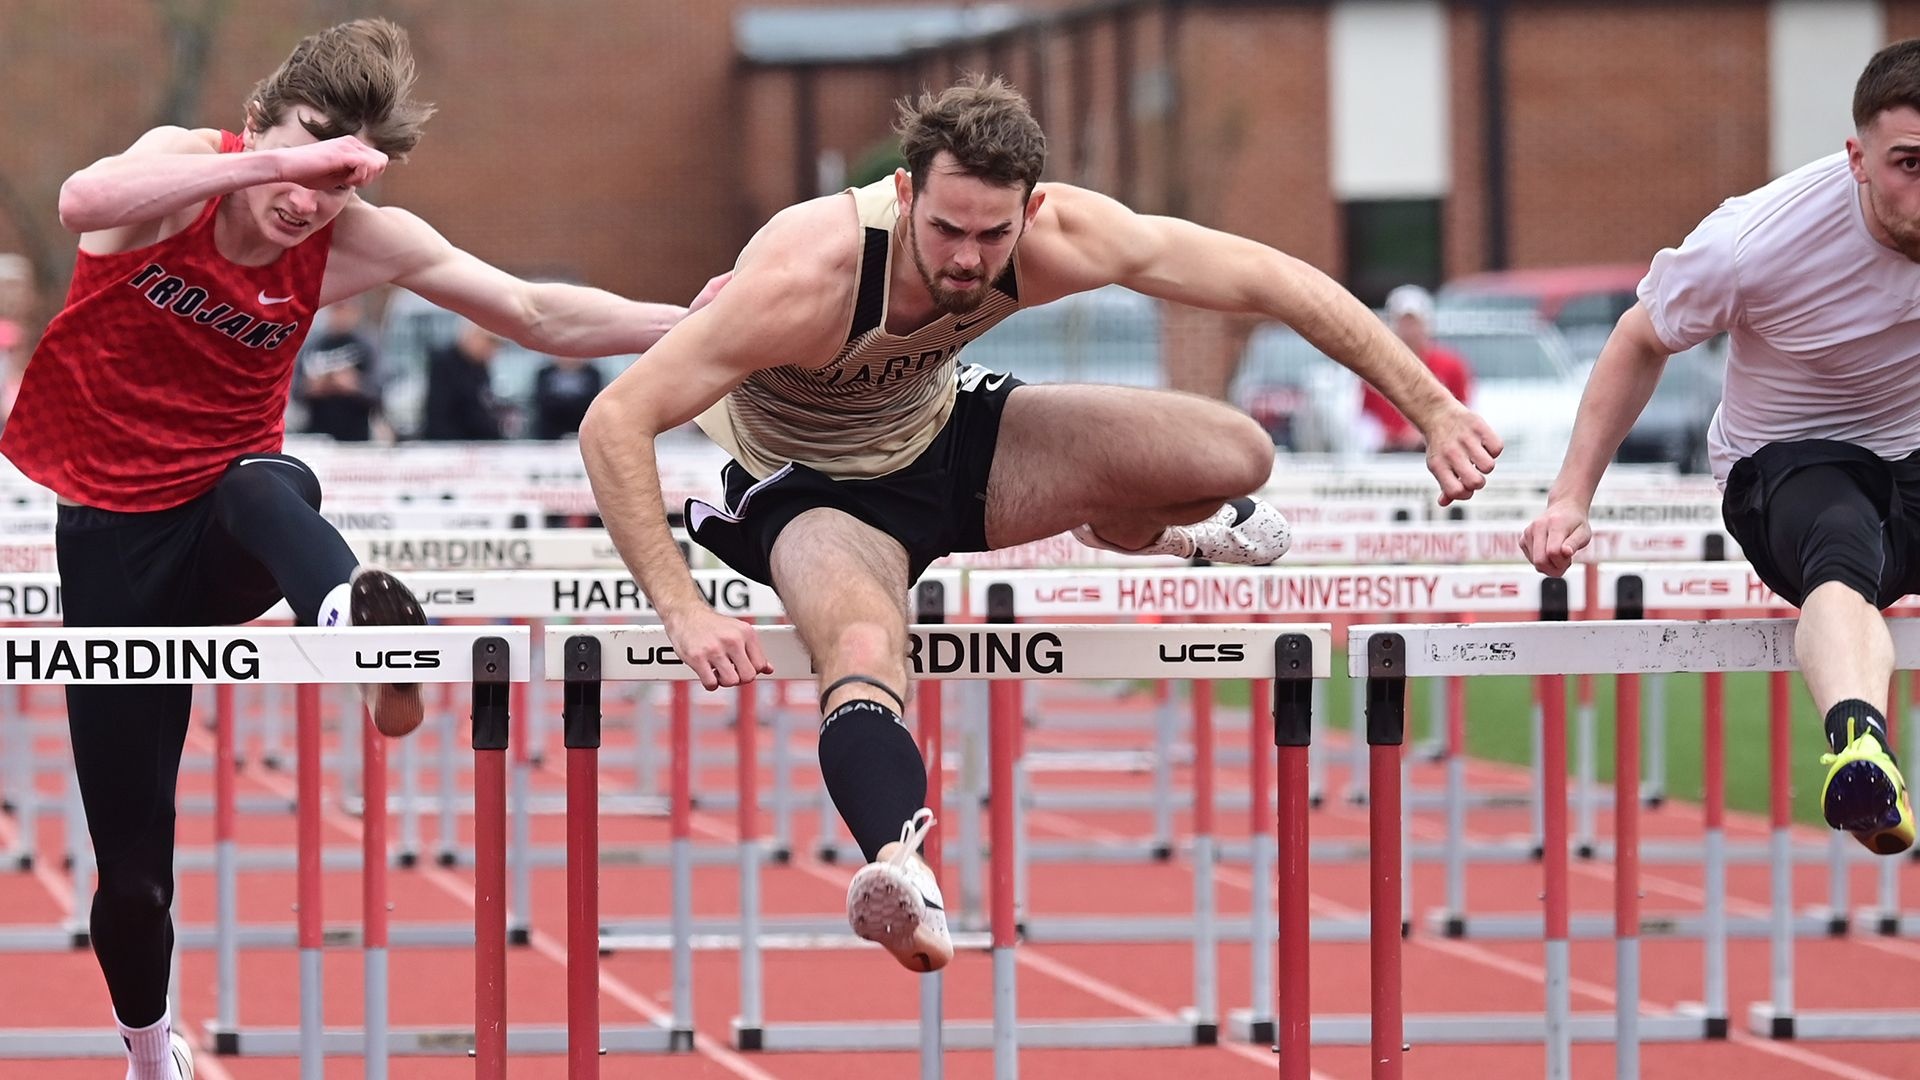 Hurdling: A footrace with a series of hurdles, Short distance running, Running competition, Hurdle run, Harding University. 1920x1080 Full HD Background.